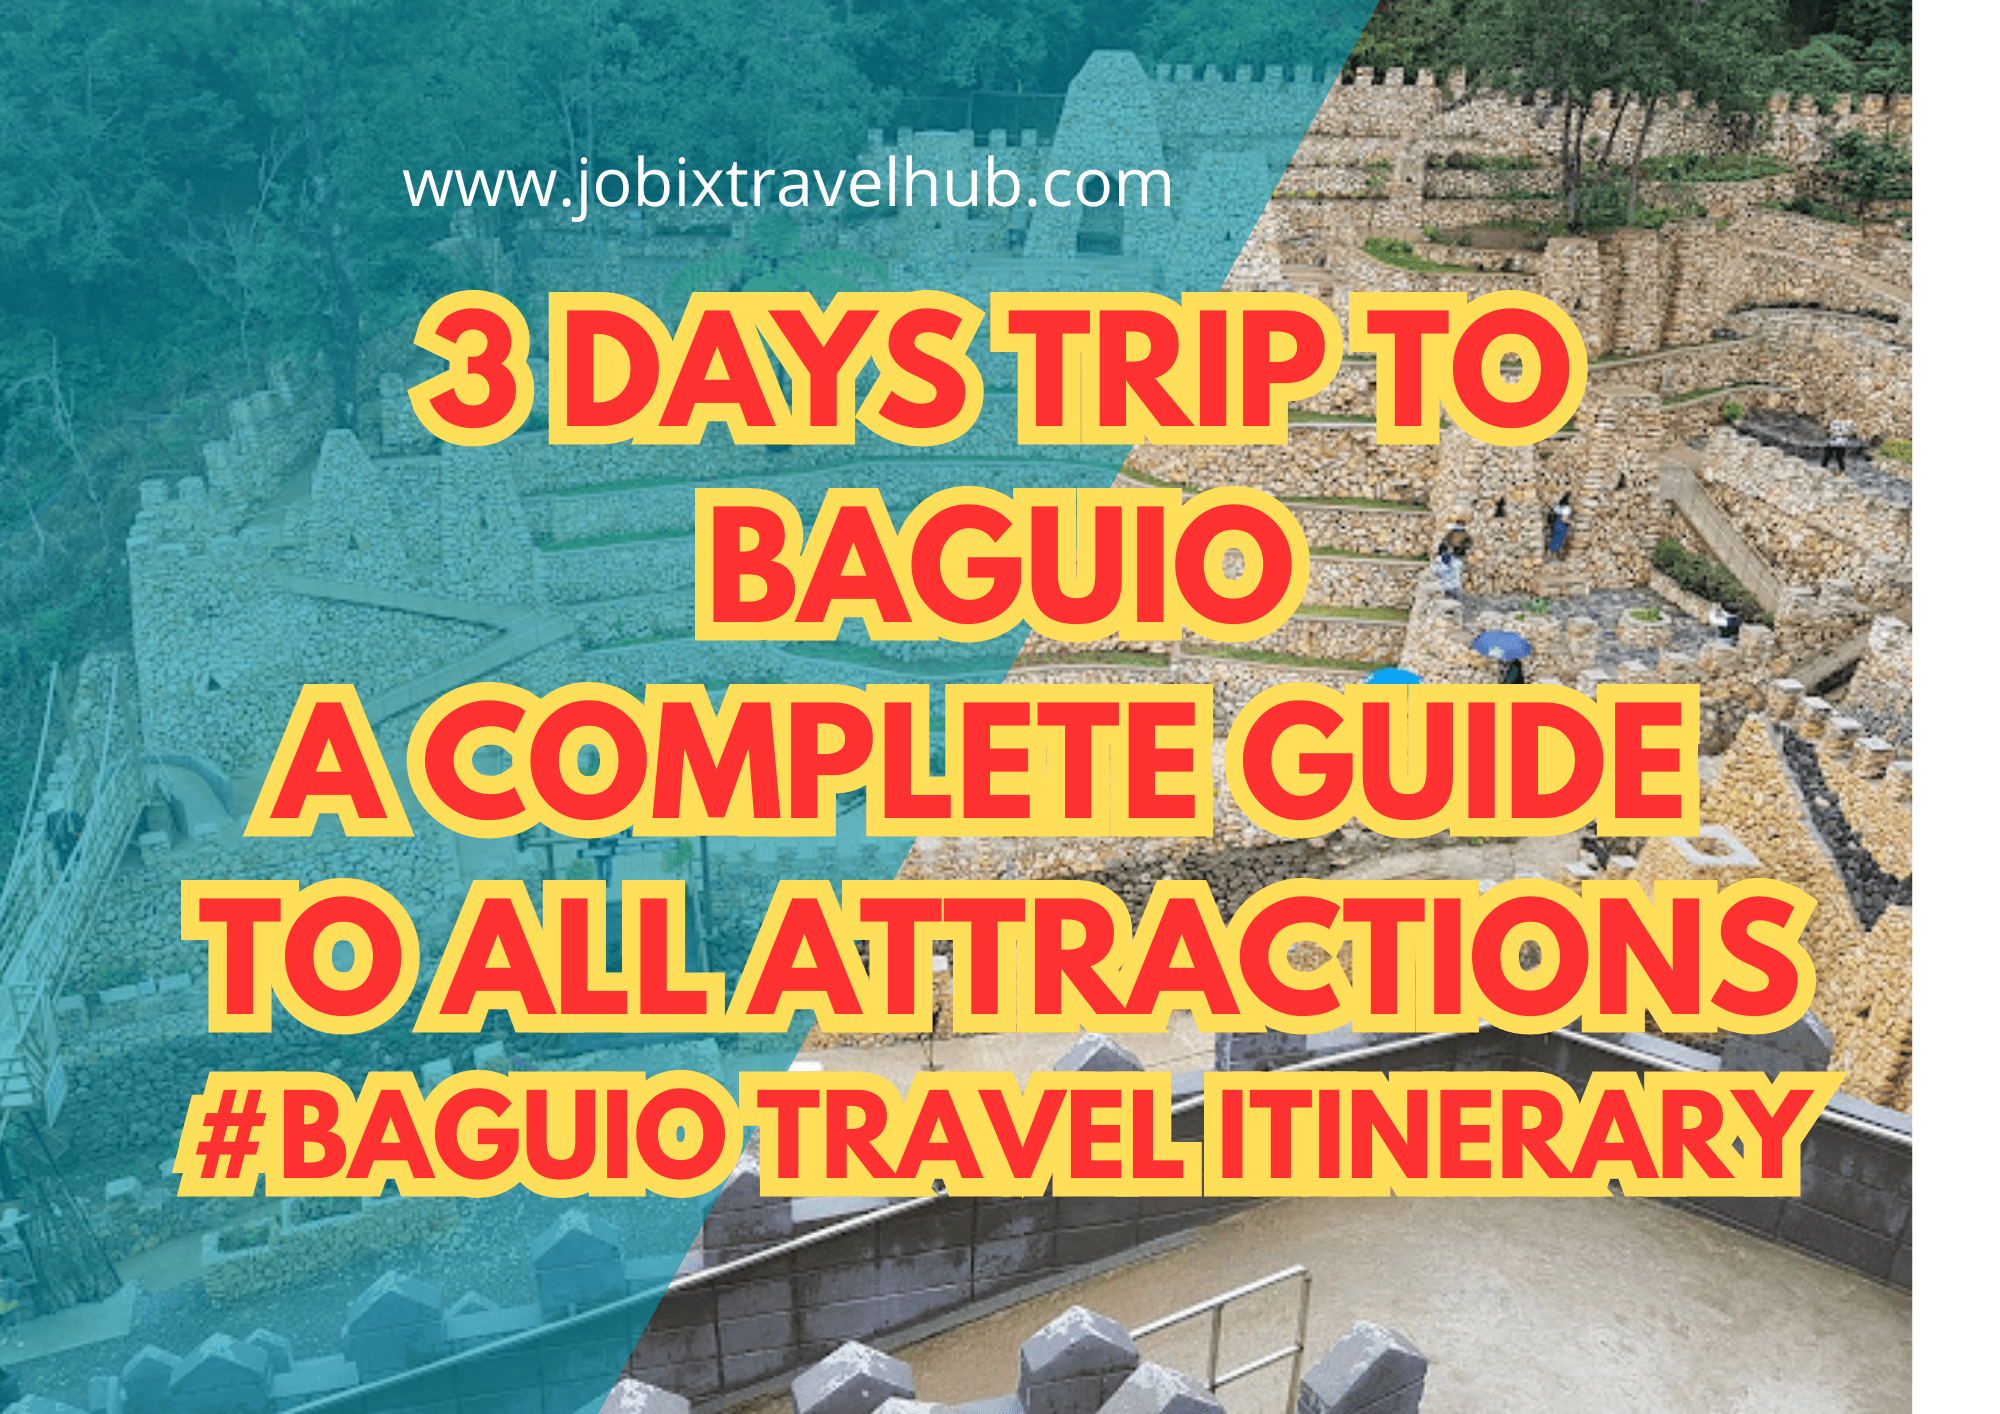 Coming down here, we take you are already packing to visit Baguio City? Here are some of the top attractions you should check out! Read more